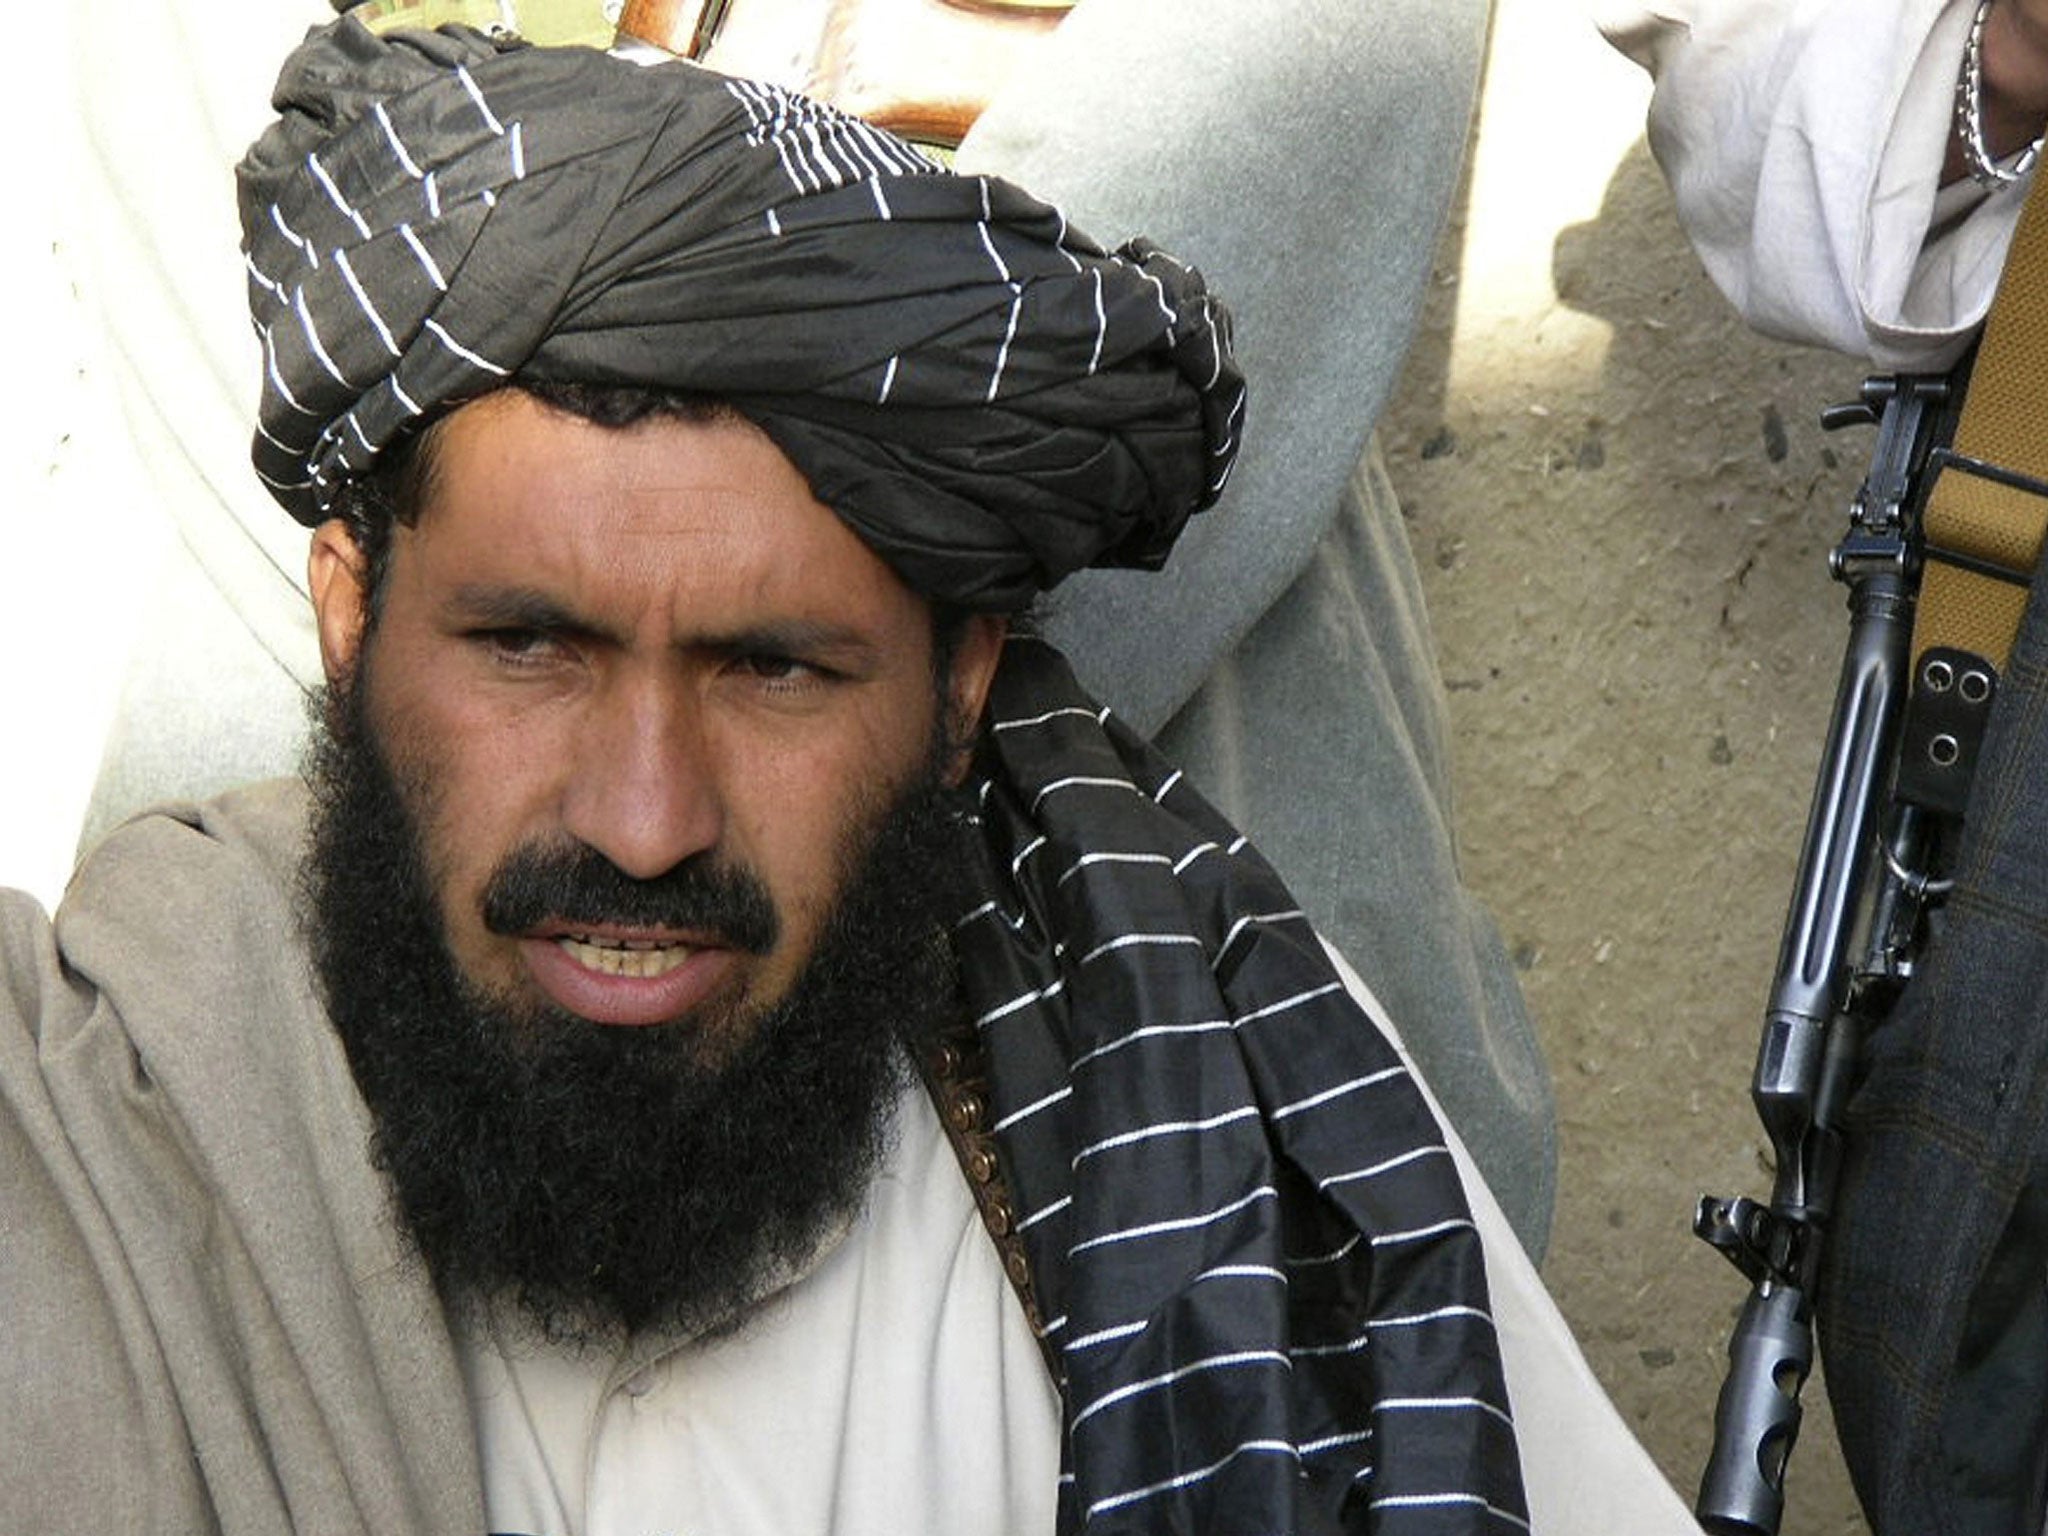 Maulvi Nazir was reportedly among nine people killed in the first strike in the village of Angoor Adda in South Waziristan